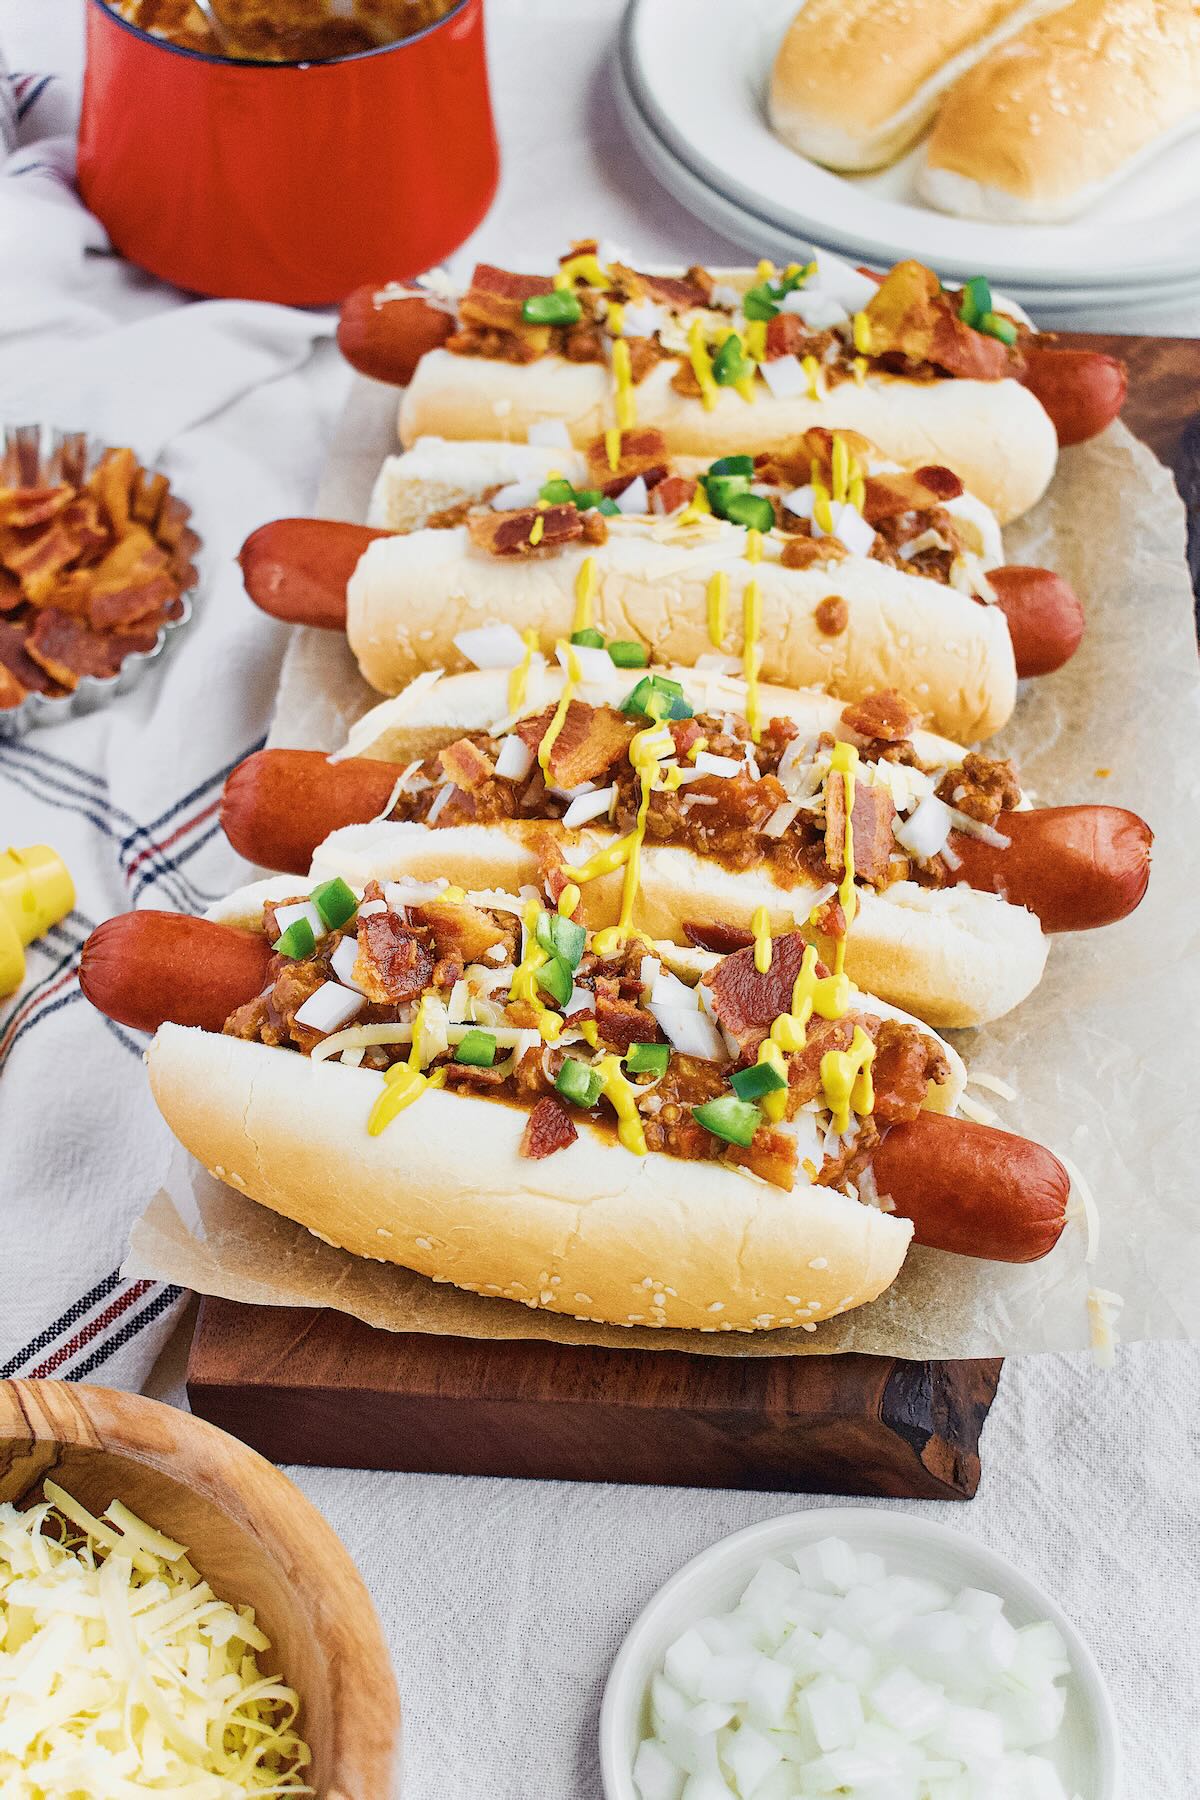 Chili Dogs lined up and topped with cheddar, onions, jalapeno, yellow mustard and Hot Dog Sauce.